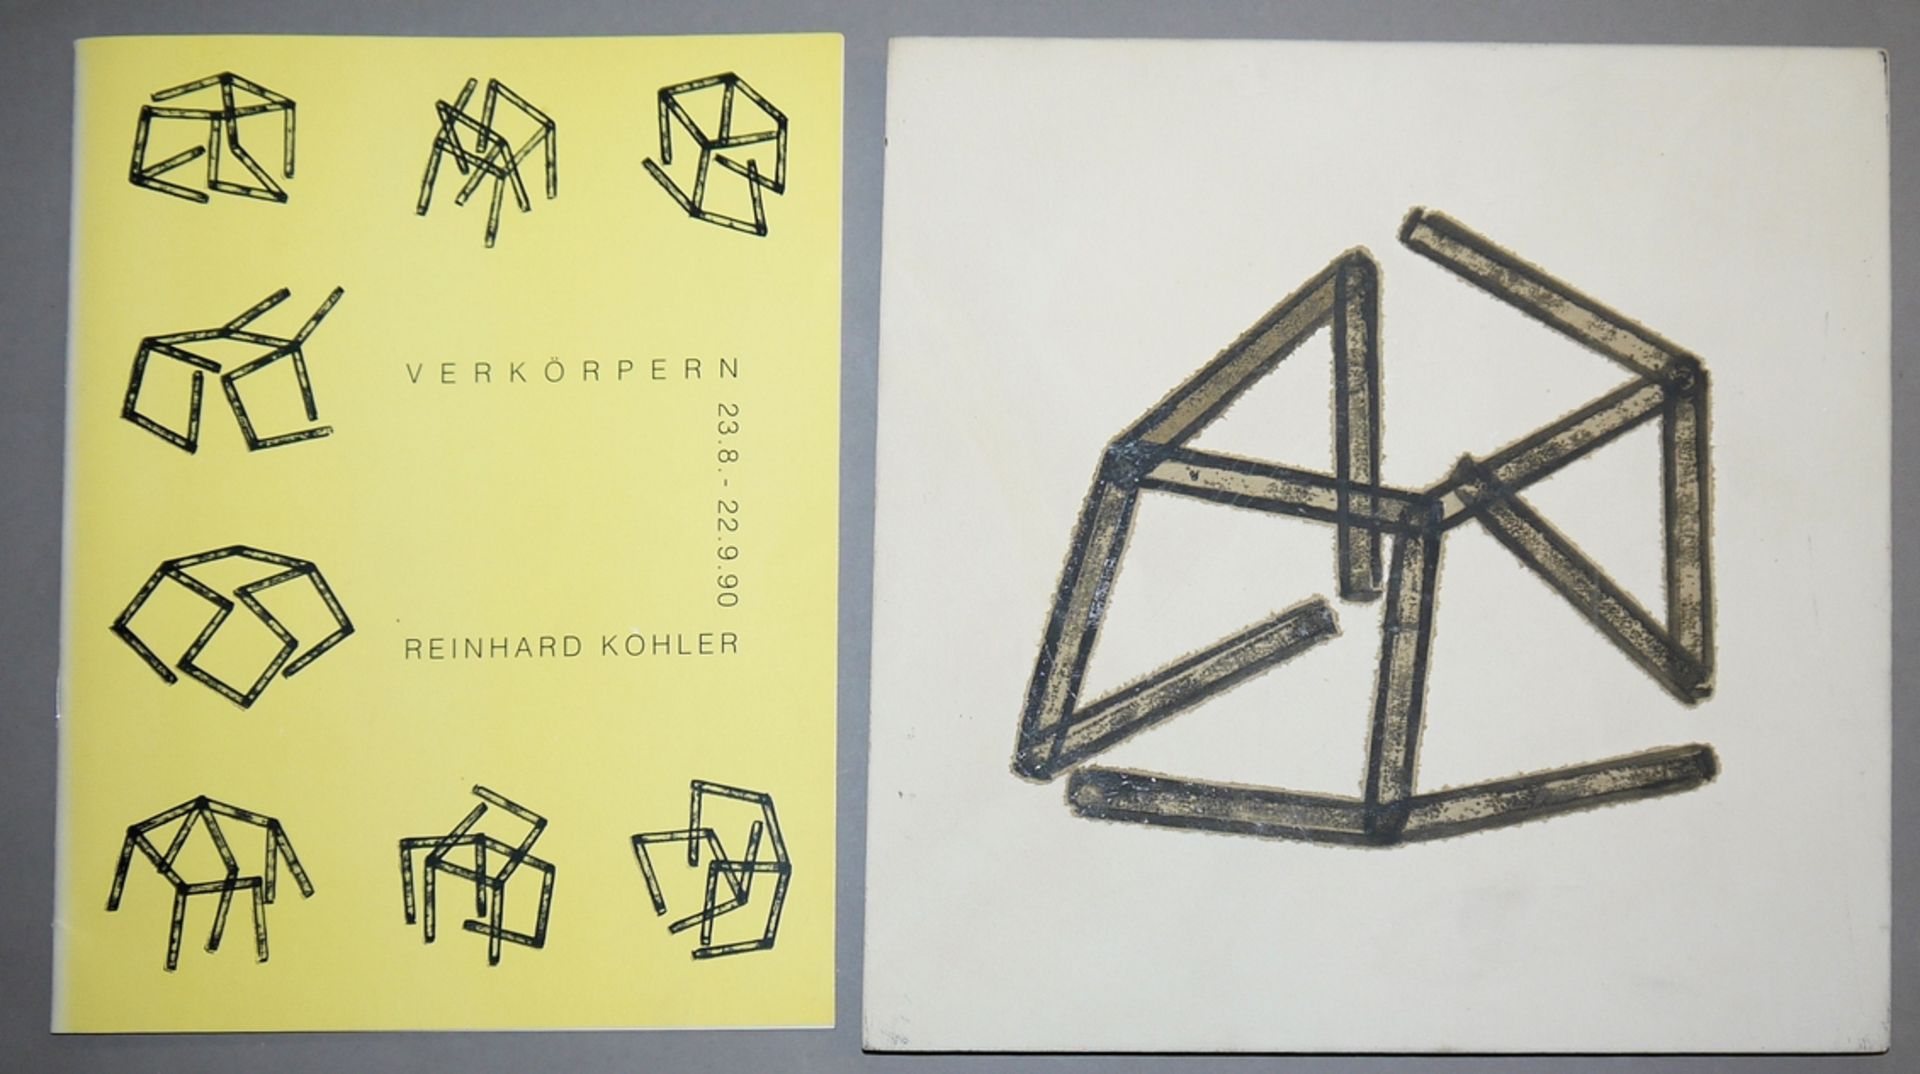 Reinhard Kohler, collection estate with 7 originals, all signed, plus exhibition catalogue - Image 2 of 4